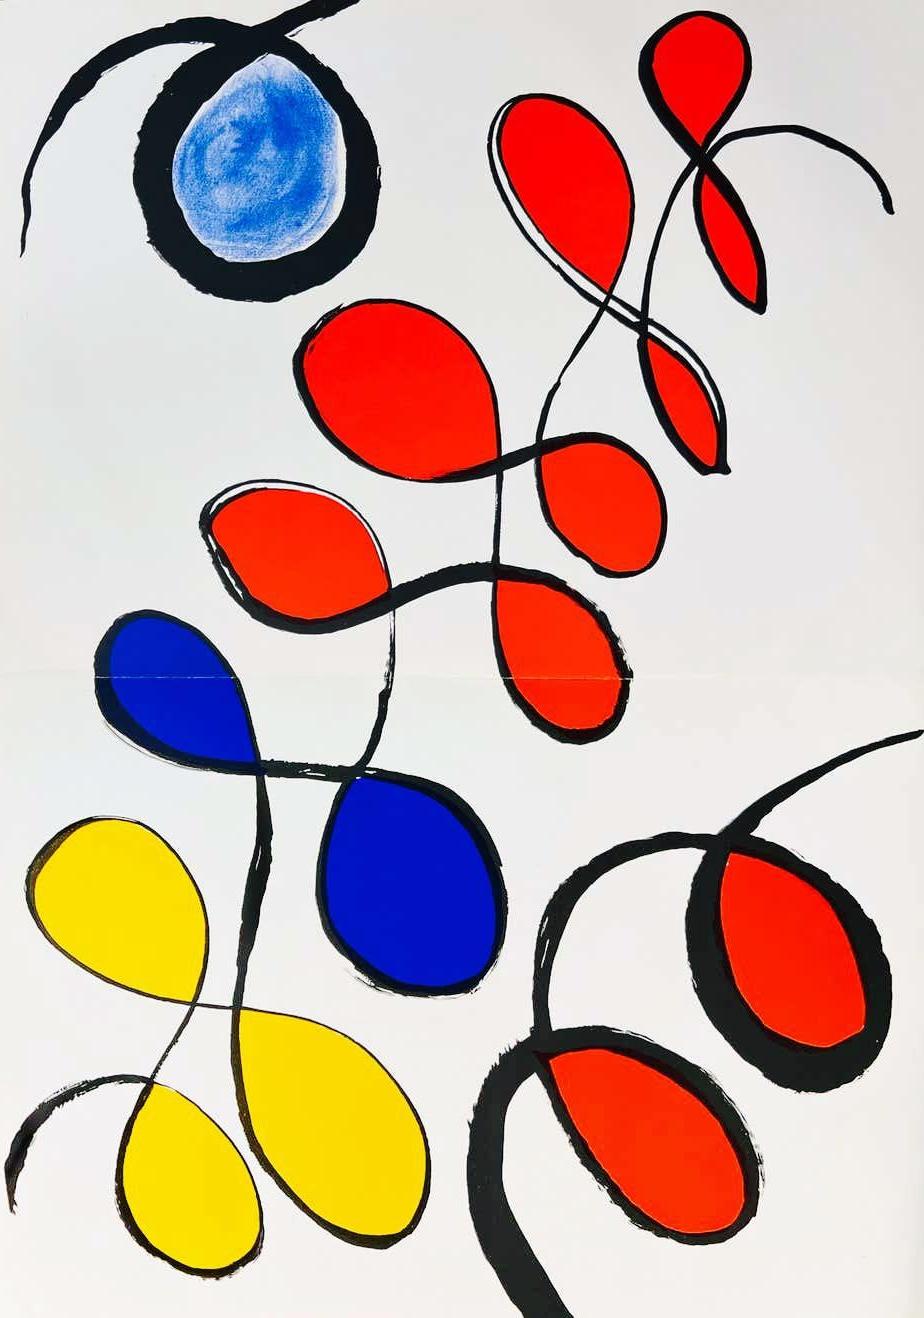 Alexander Calder Lithograph c. 1967:

Lithograph in colors; 15 x 22 inches.
Very good overall vintage condition; contains center fold-line as originally issued; well-preseved. 
Unsigned from an edition of unknown.
From: Derrière le miroir Printed in